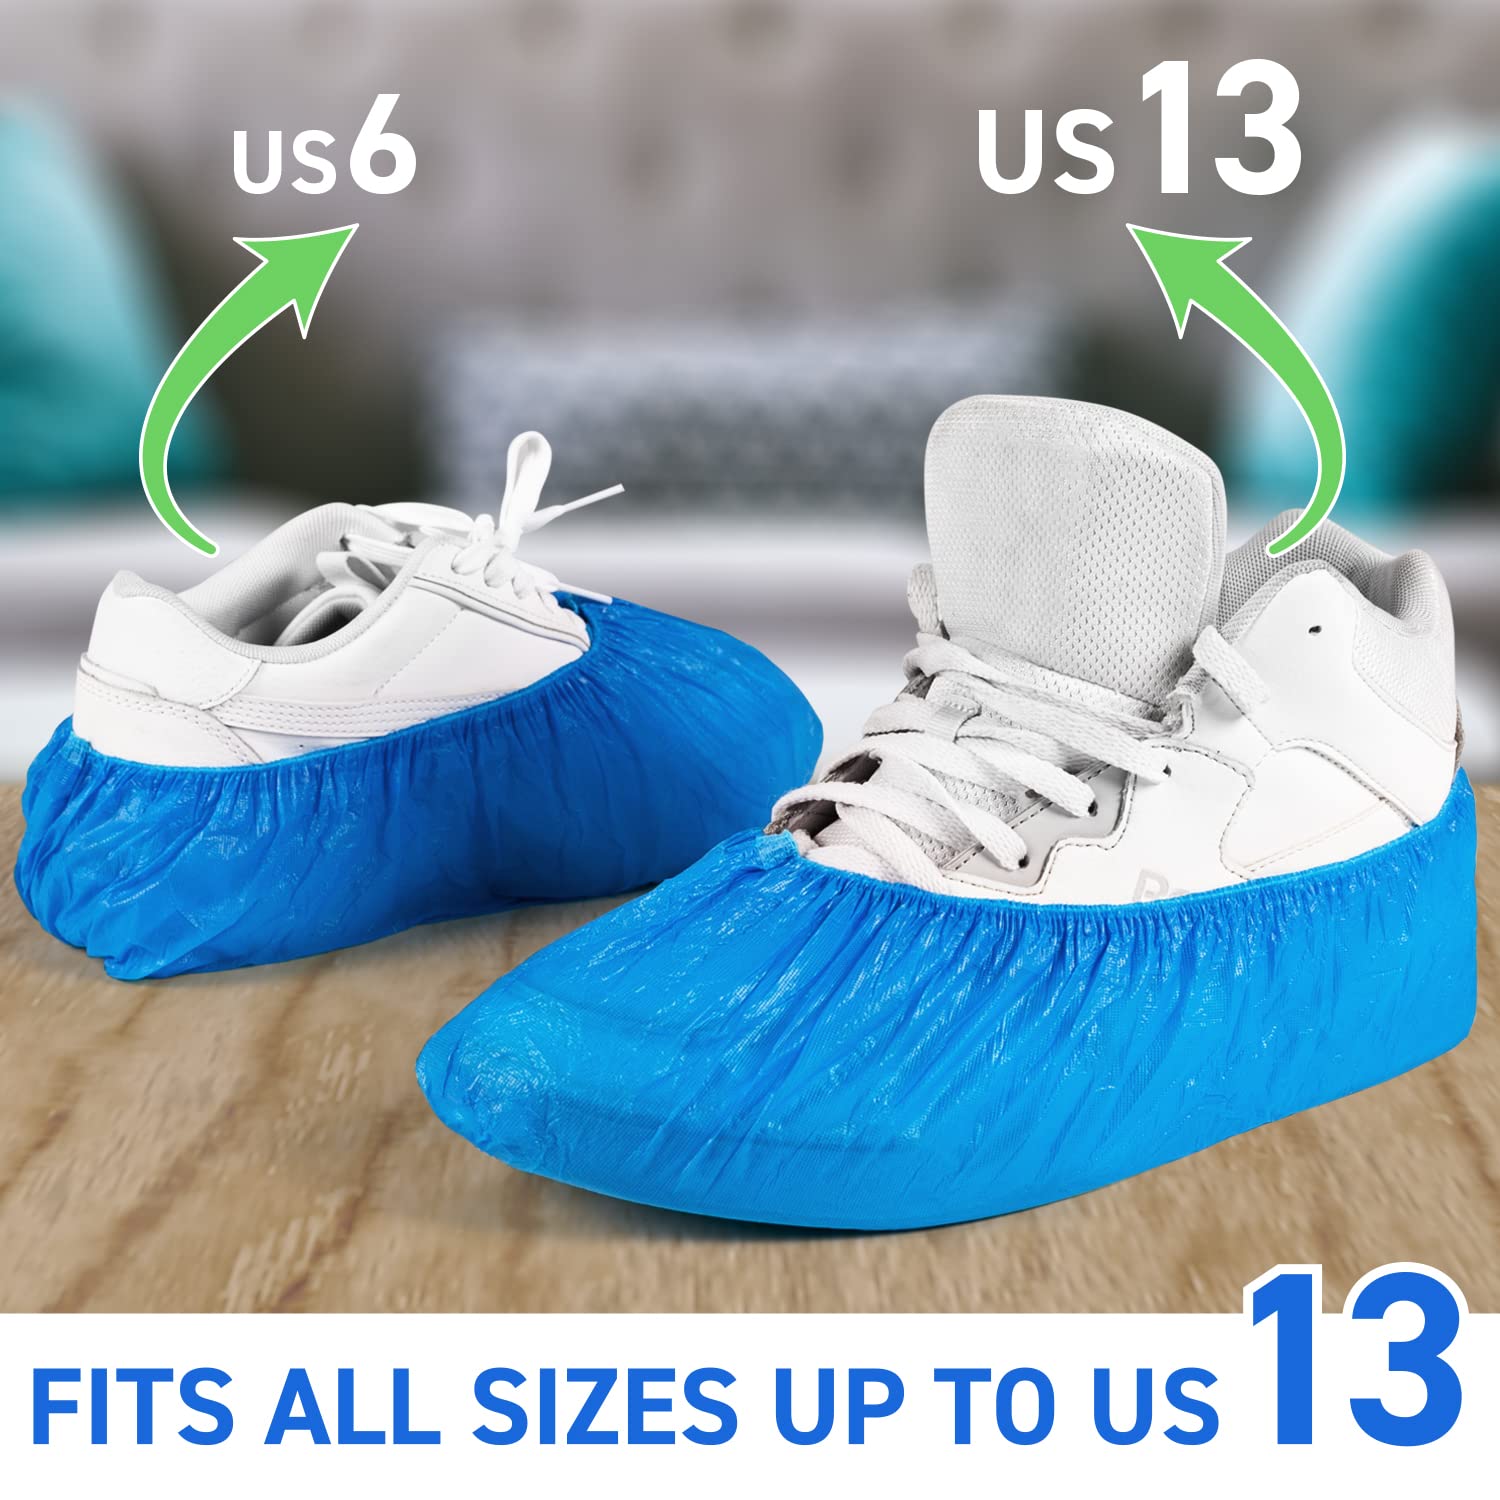 120 PCS Shoe Covers Disposable Non Slip, Waterproof, Recyclable Shoe Booties, Larger Fit - All Sizes Up To 13 US Men - shoe covers for indoors